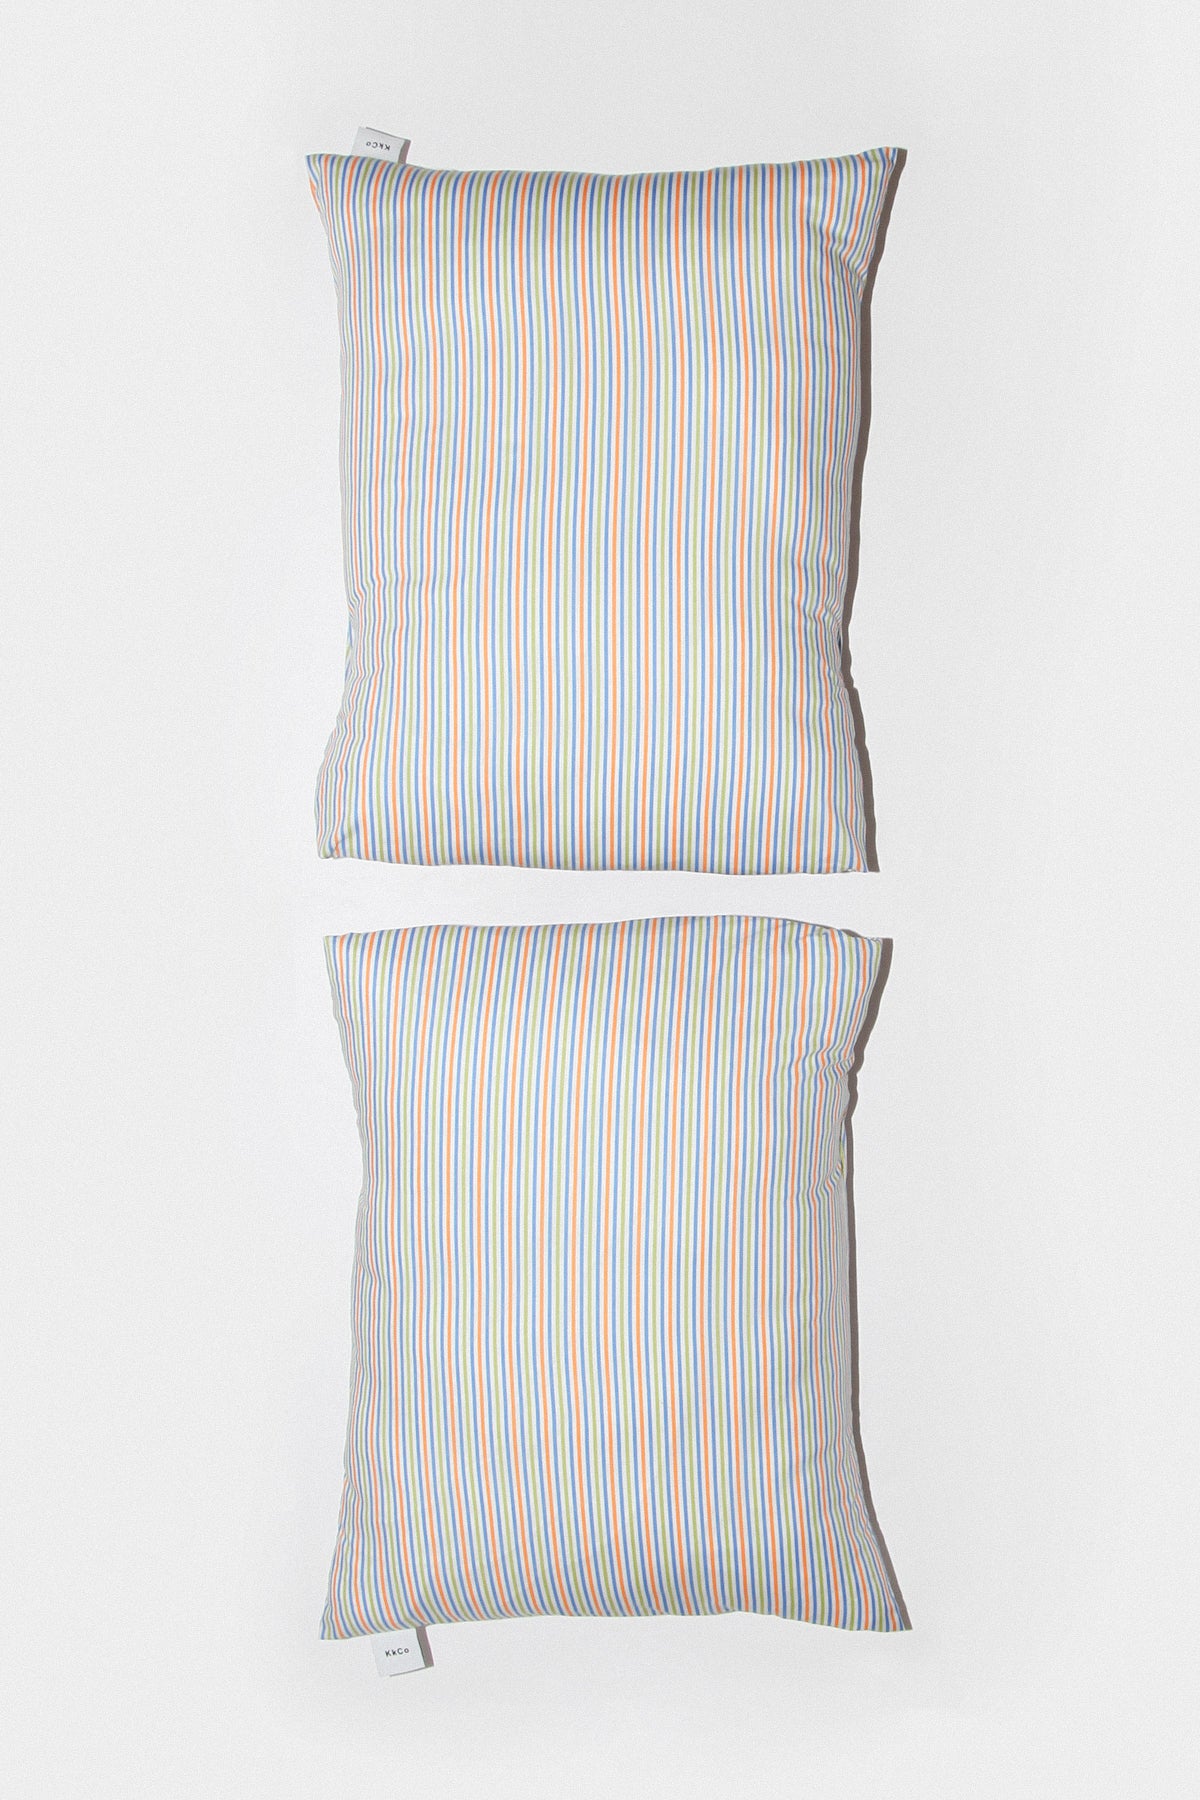 Pillow Sham Set in Striped Sunny